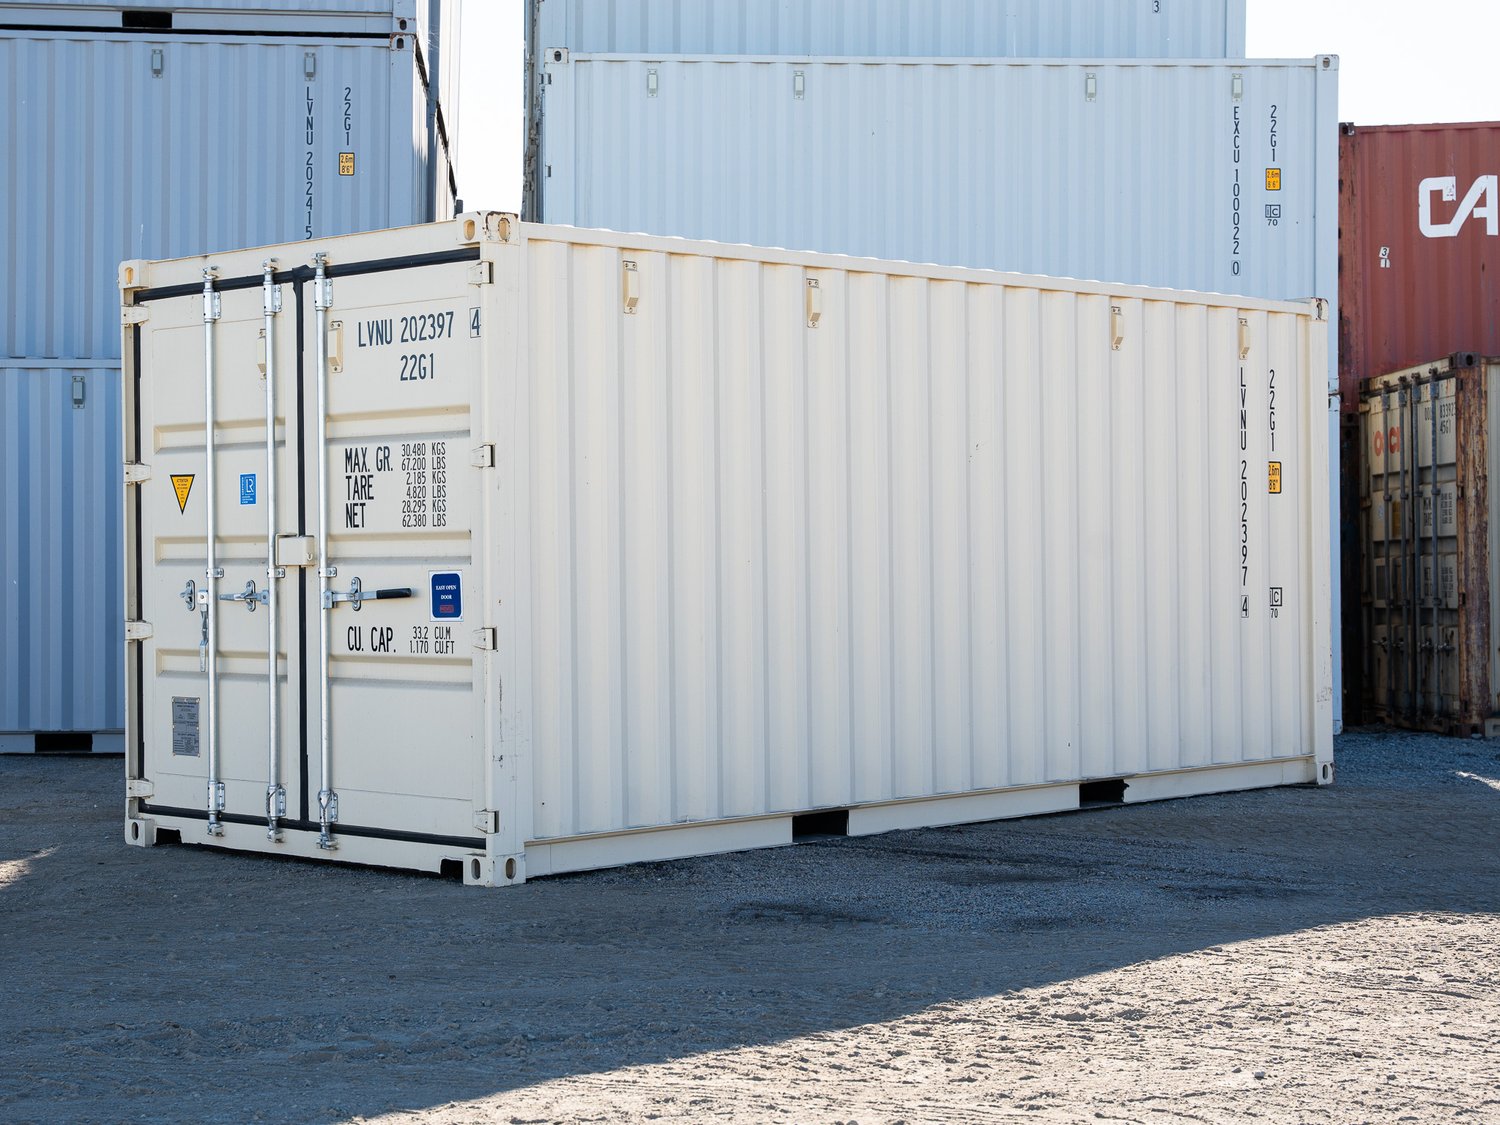 Dry Storage Shipping Containers Rent or Buy Today!